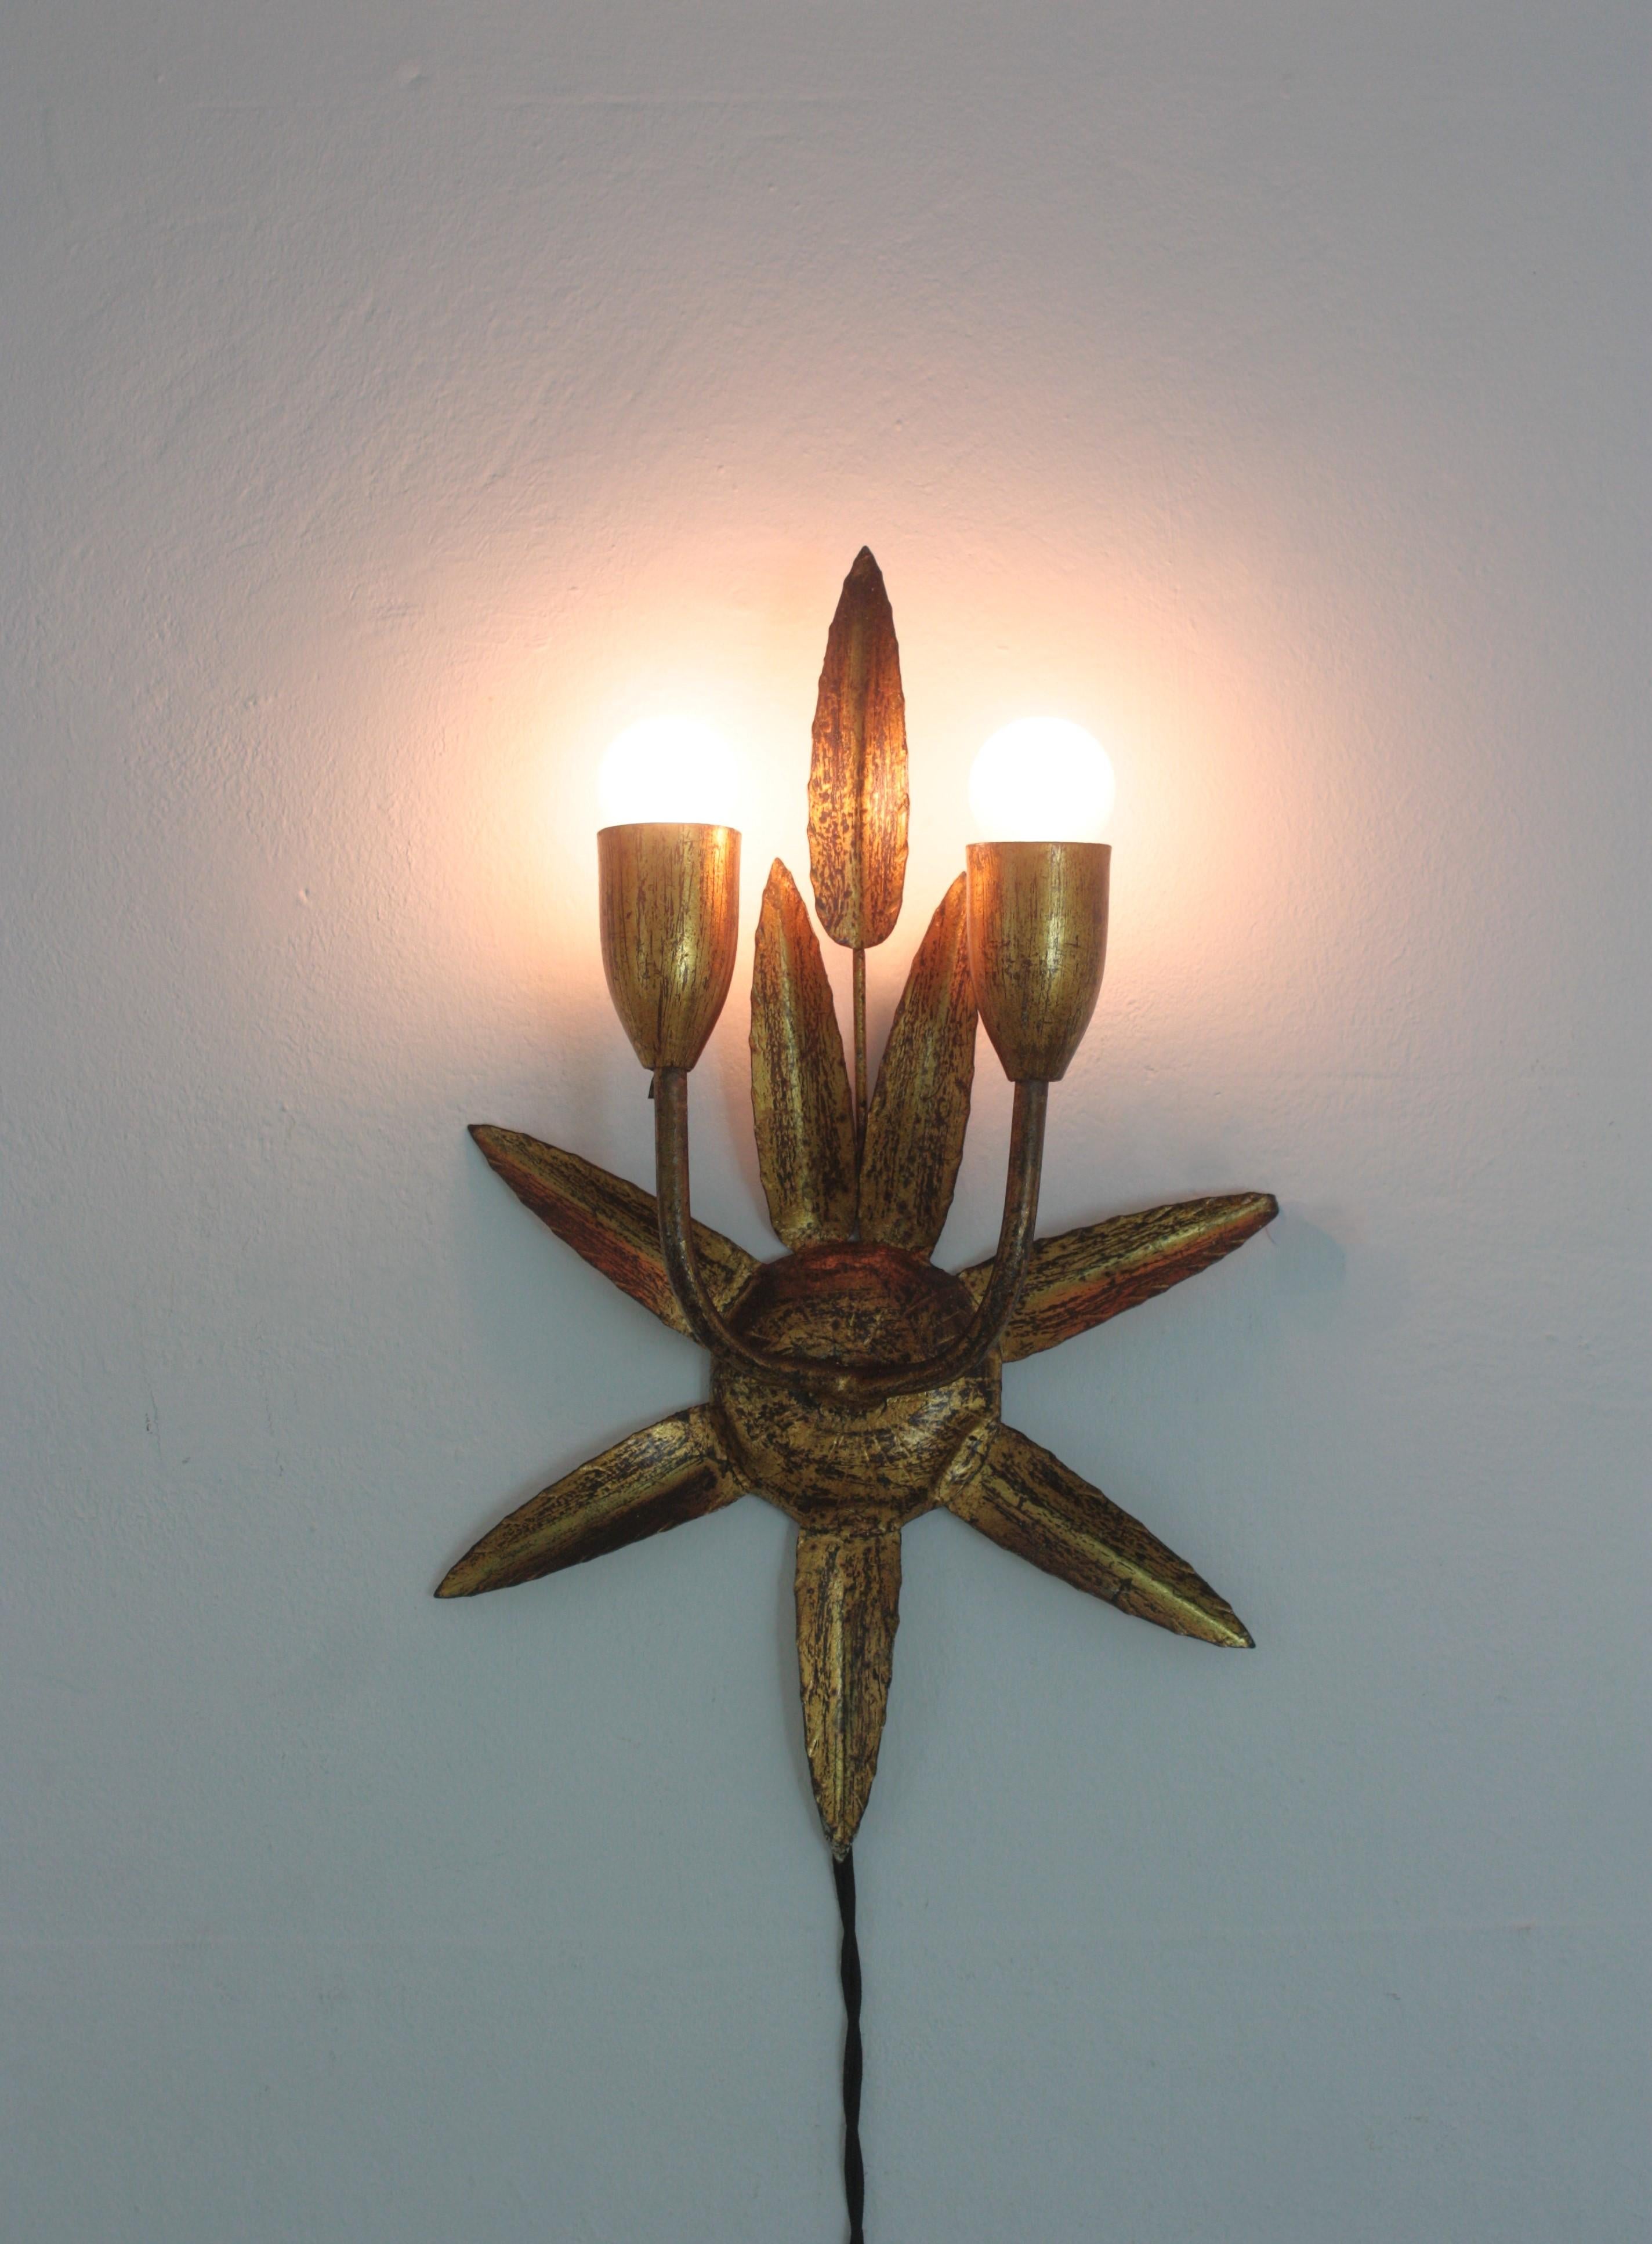 Spanish Gilt Iron Wall Sconce with Foliage Design and Starburst Backplate, 1950s For Sale 4